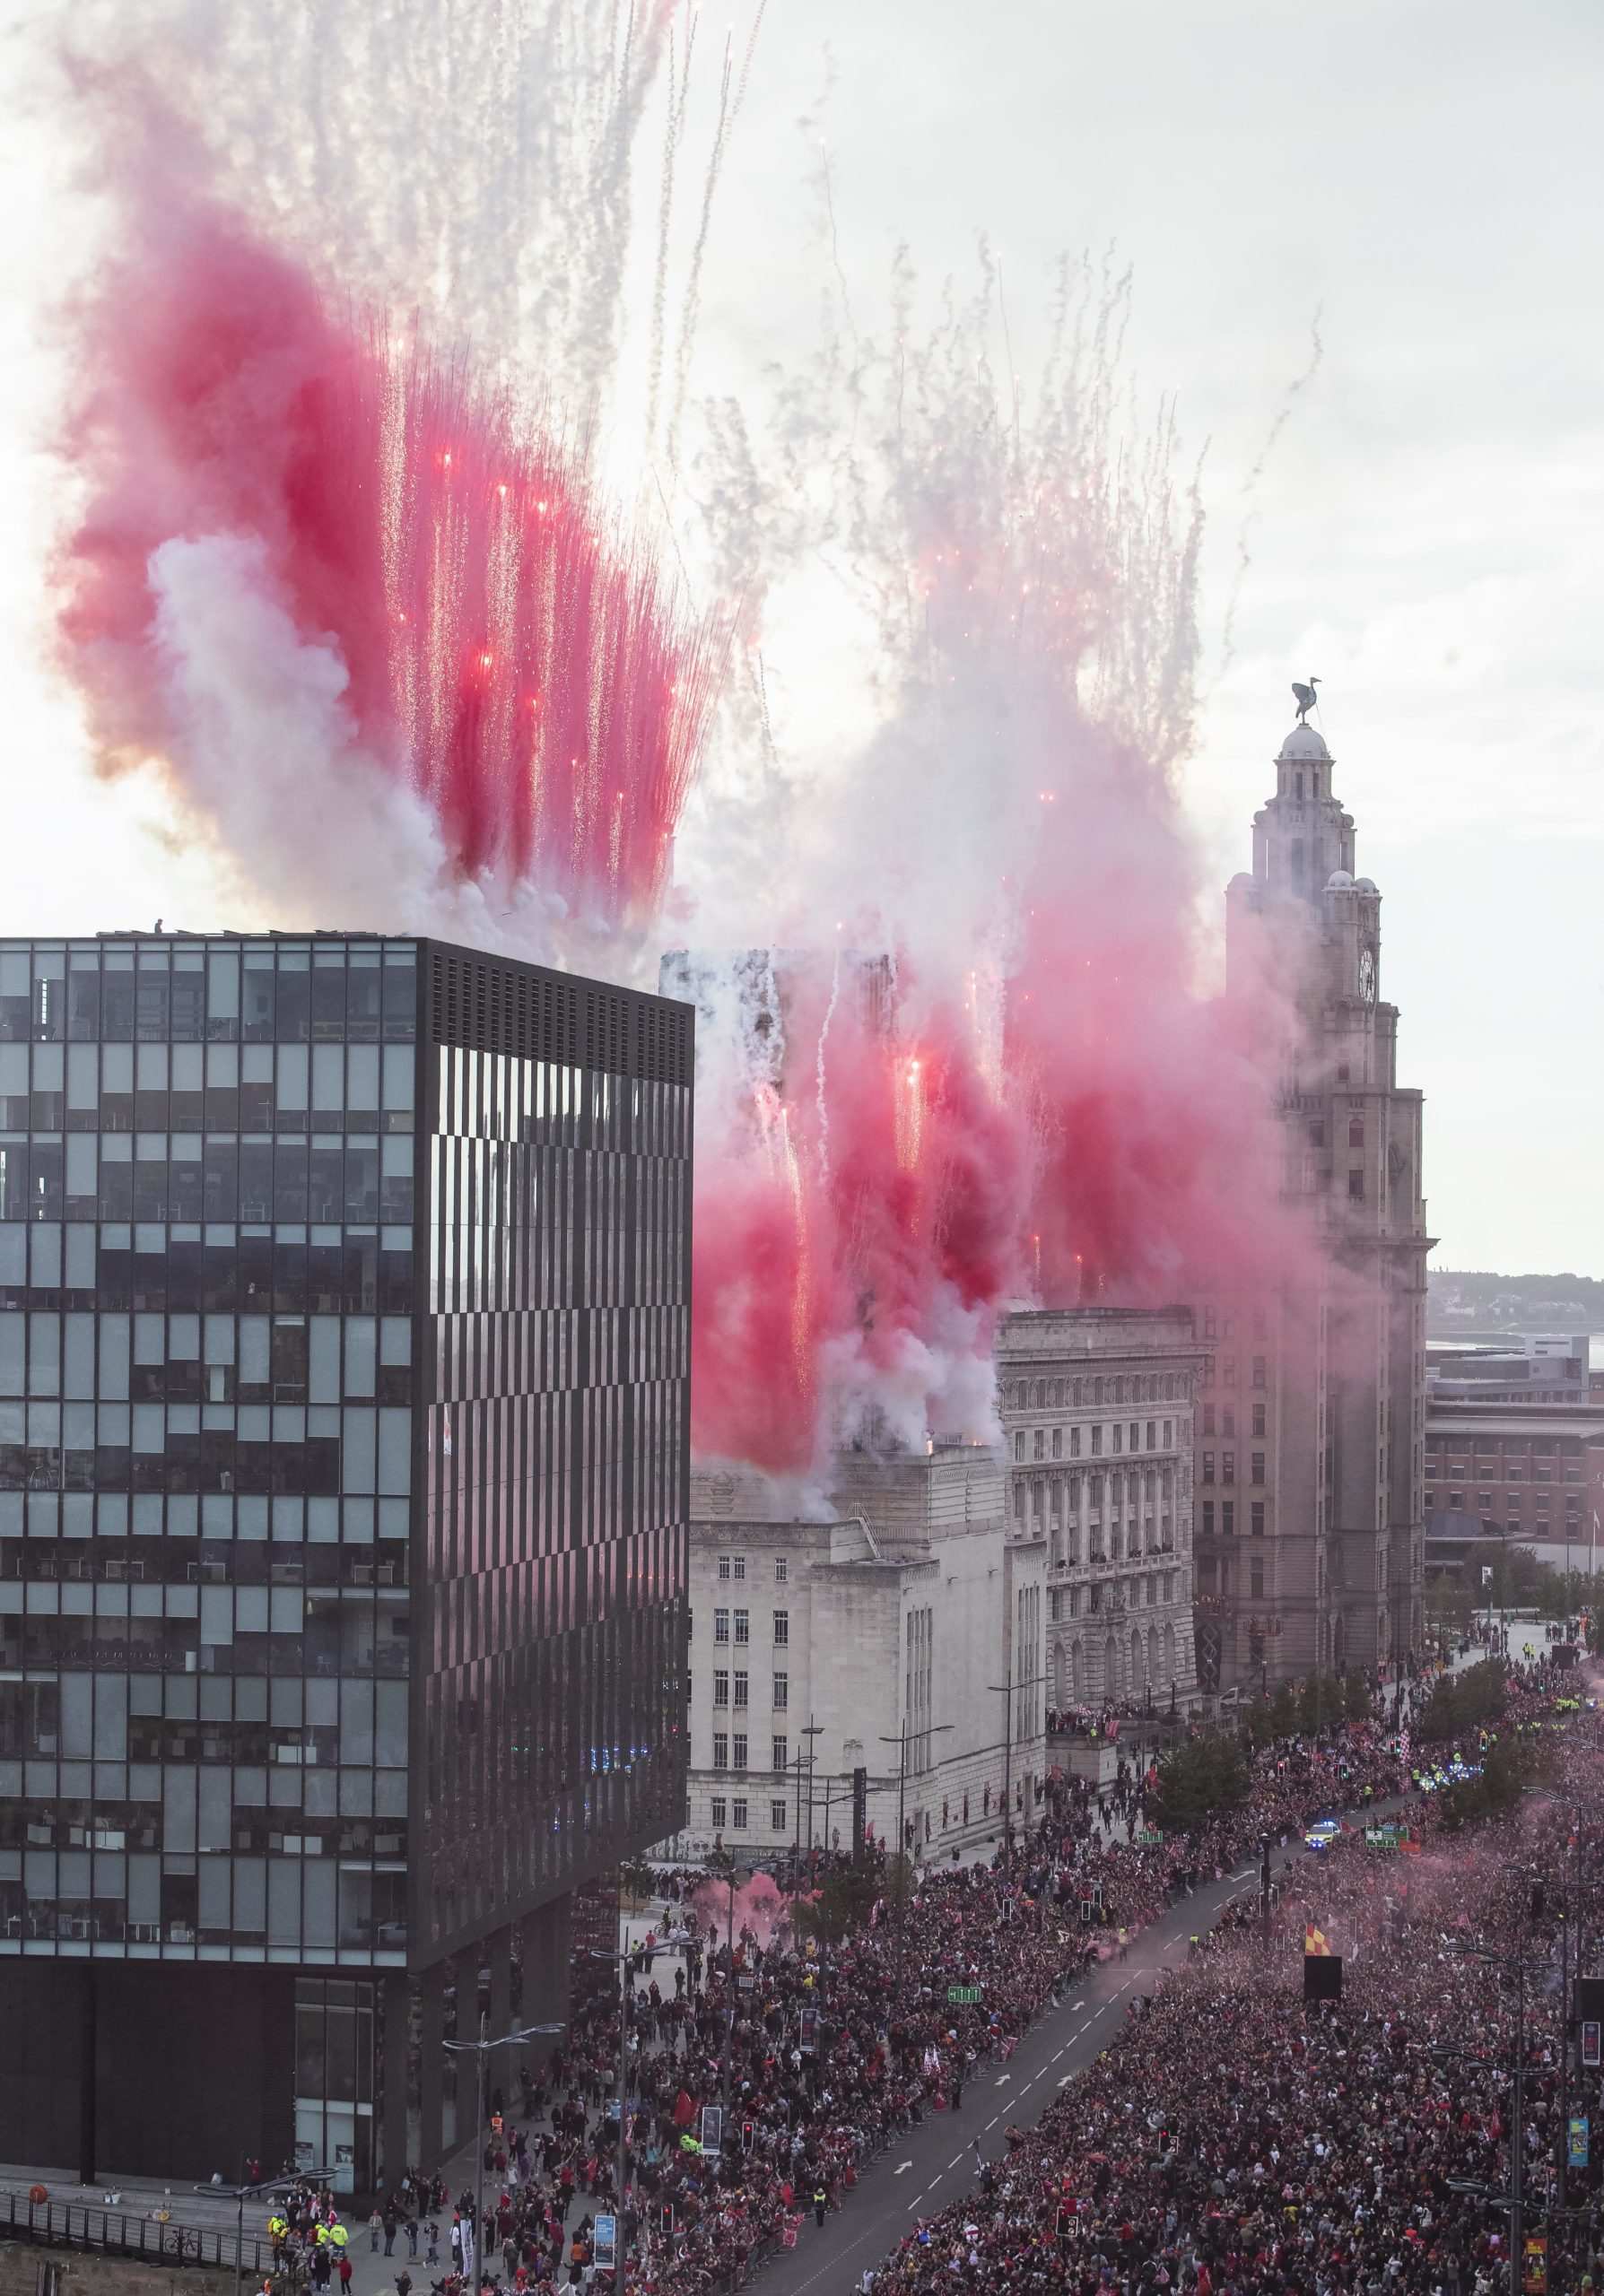 Liverpool FC’s parade through the city is likely to boost numbers for May